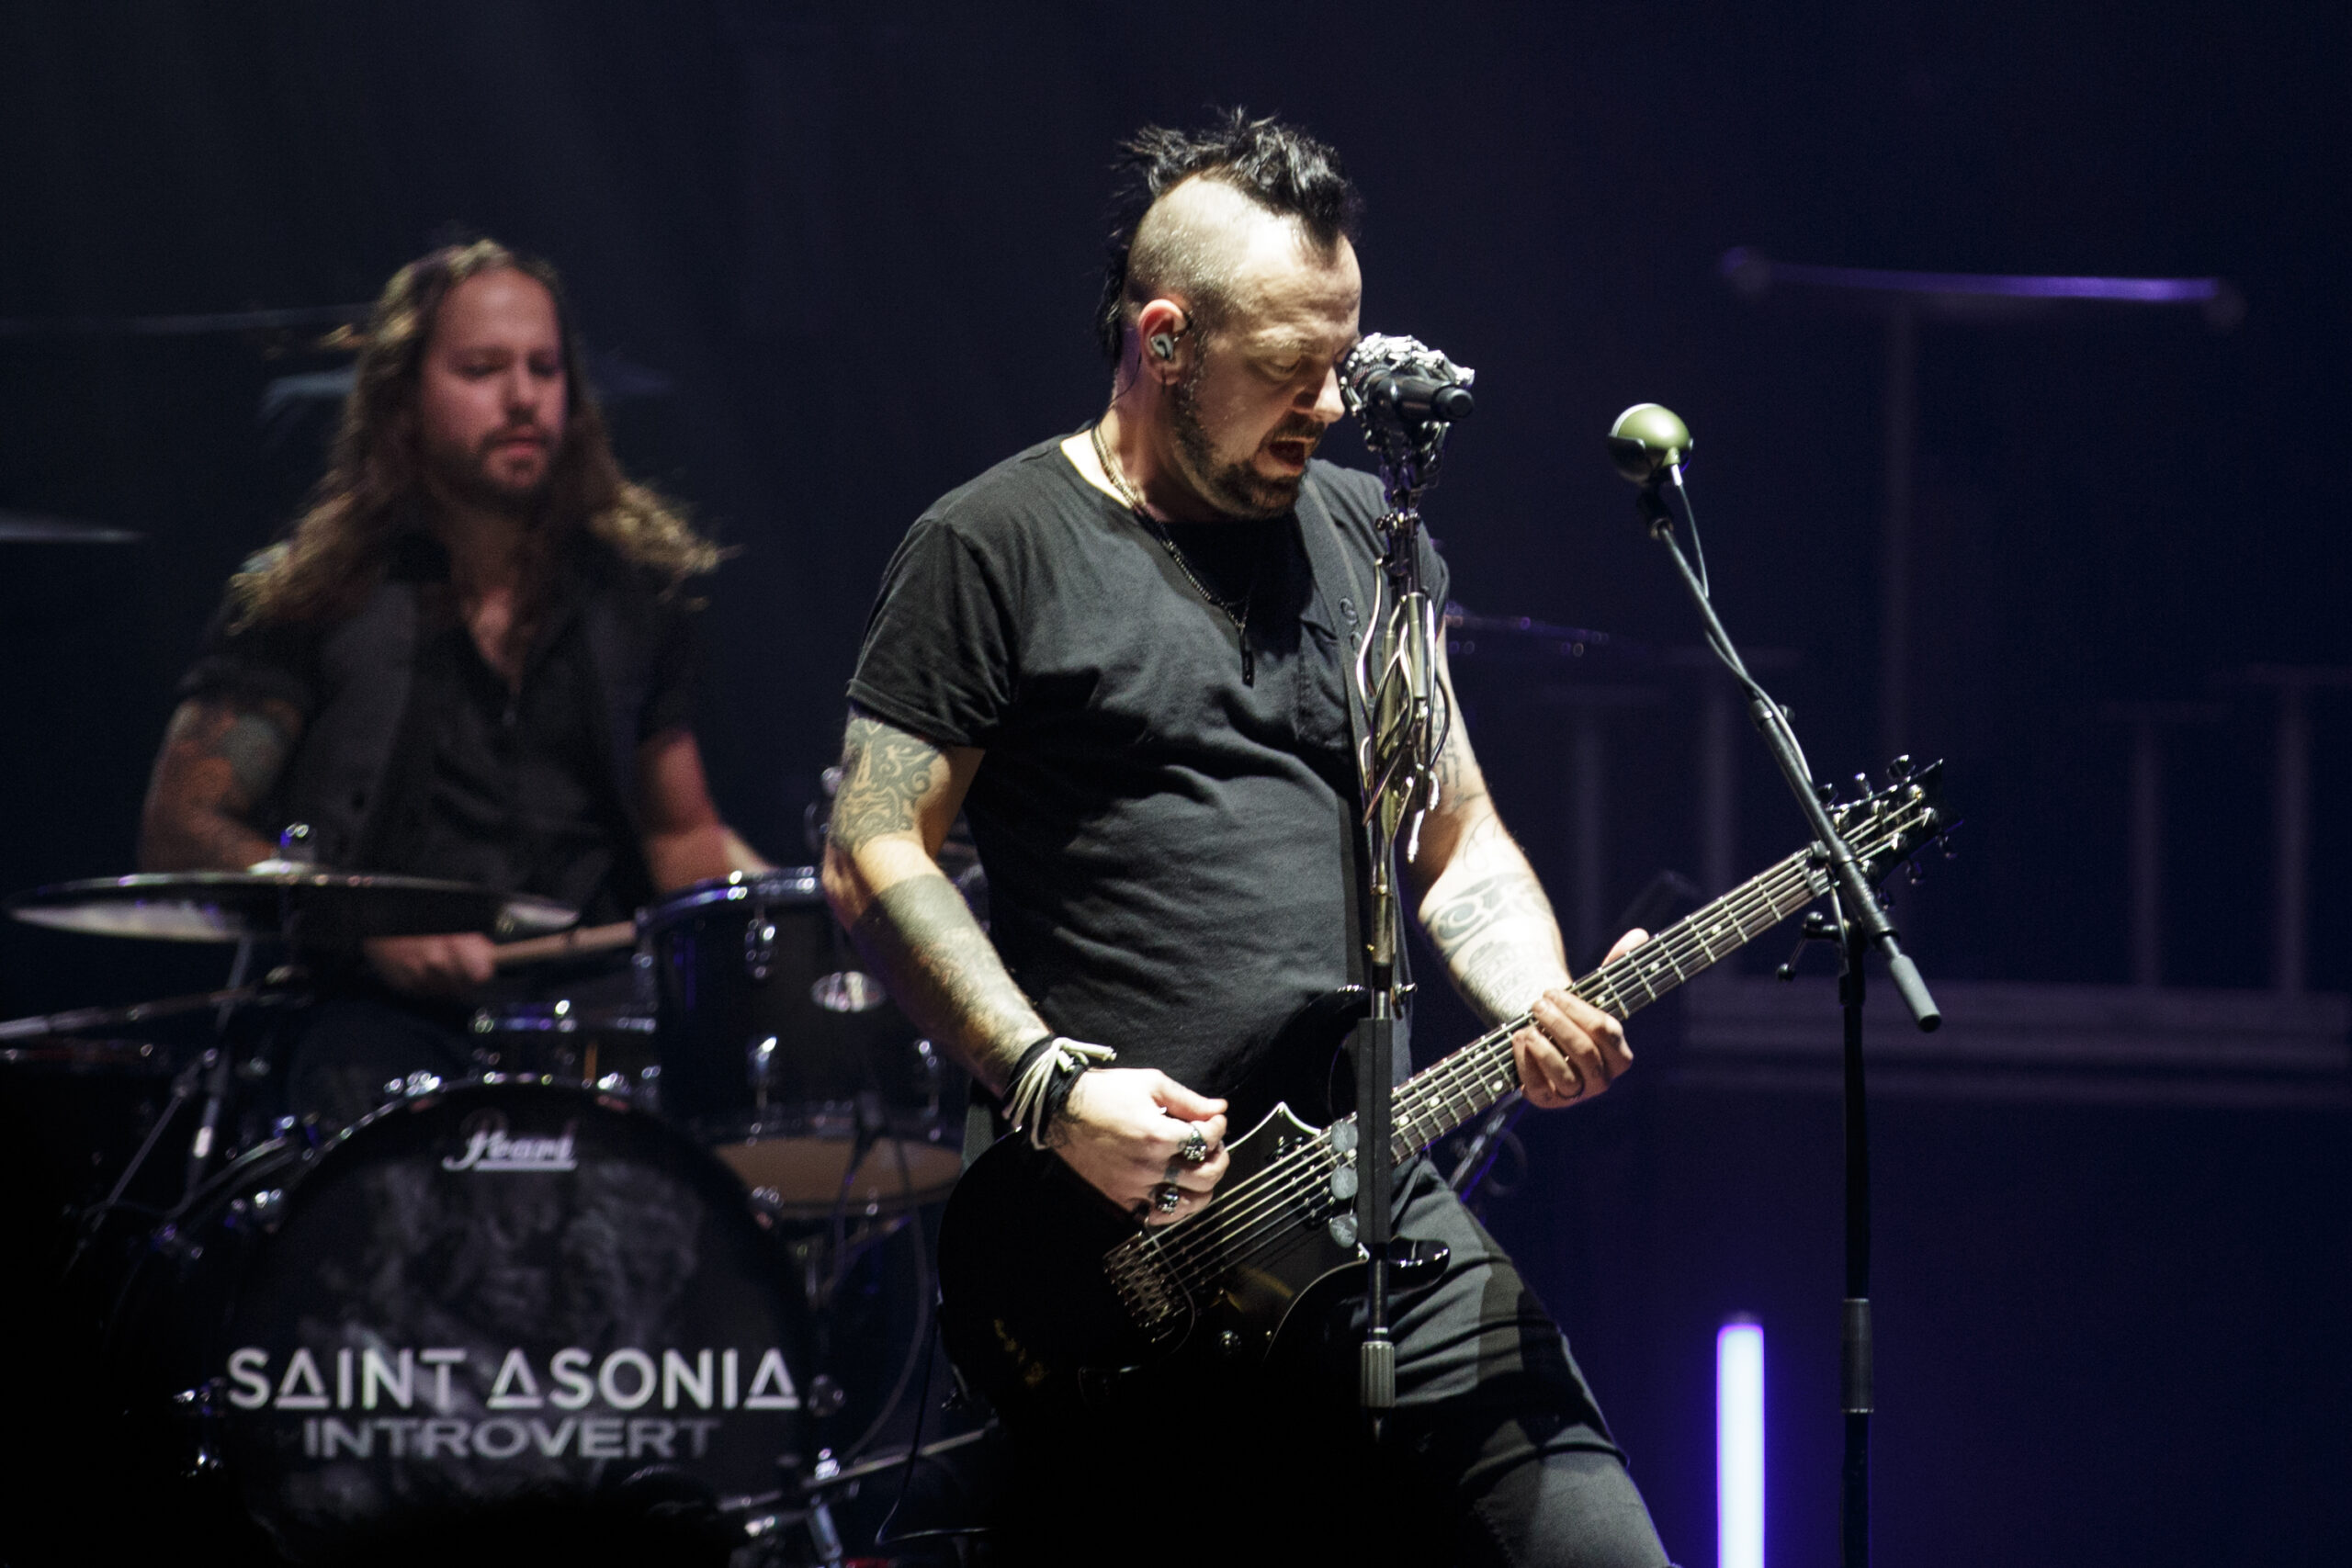 Saint Asonia Photo by Annette Holloway for HM Magazine